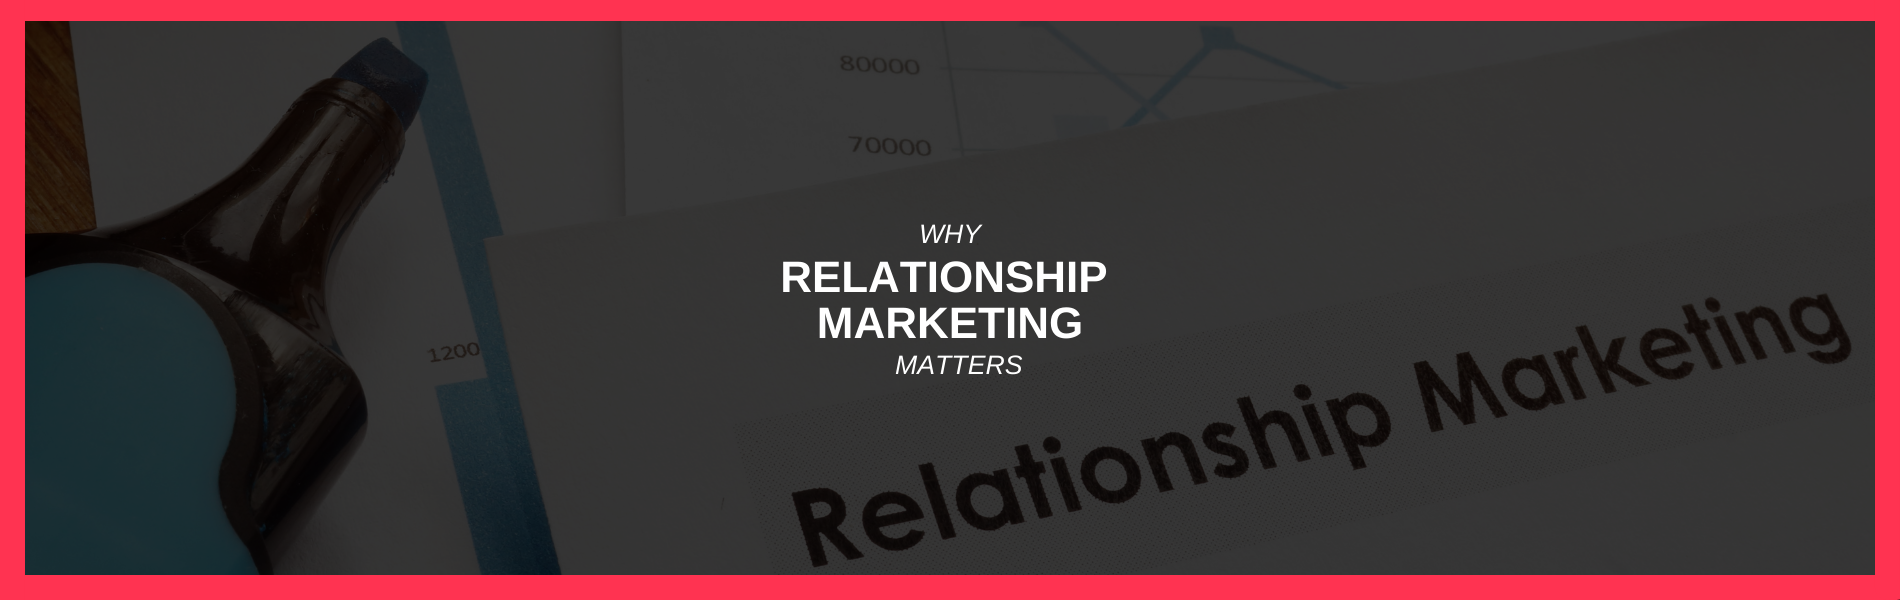 Why Relationship Marketing Matters